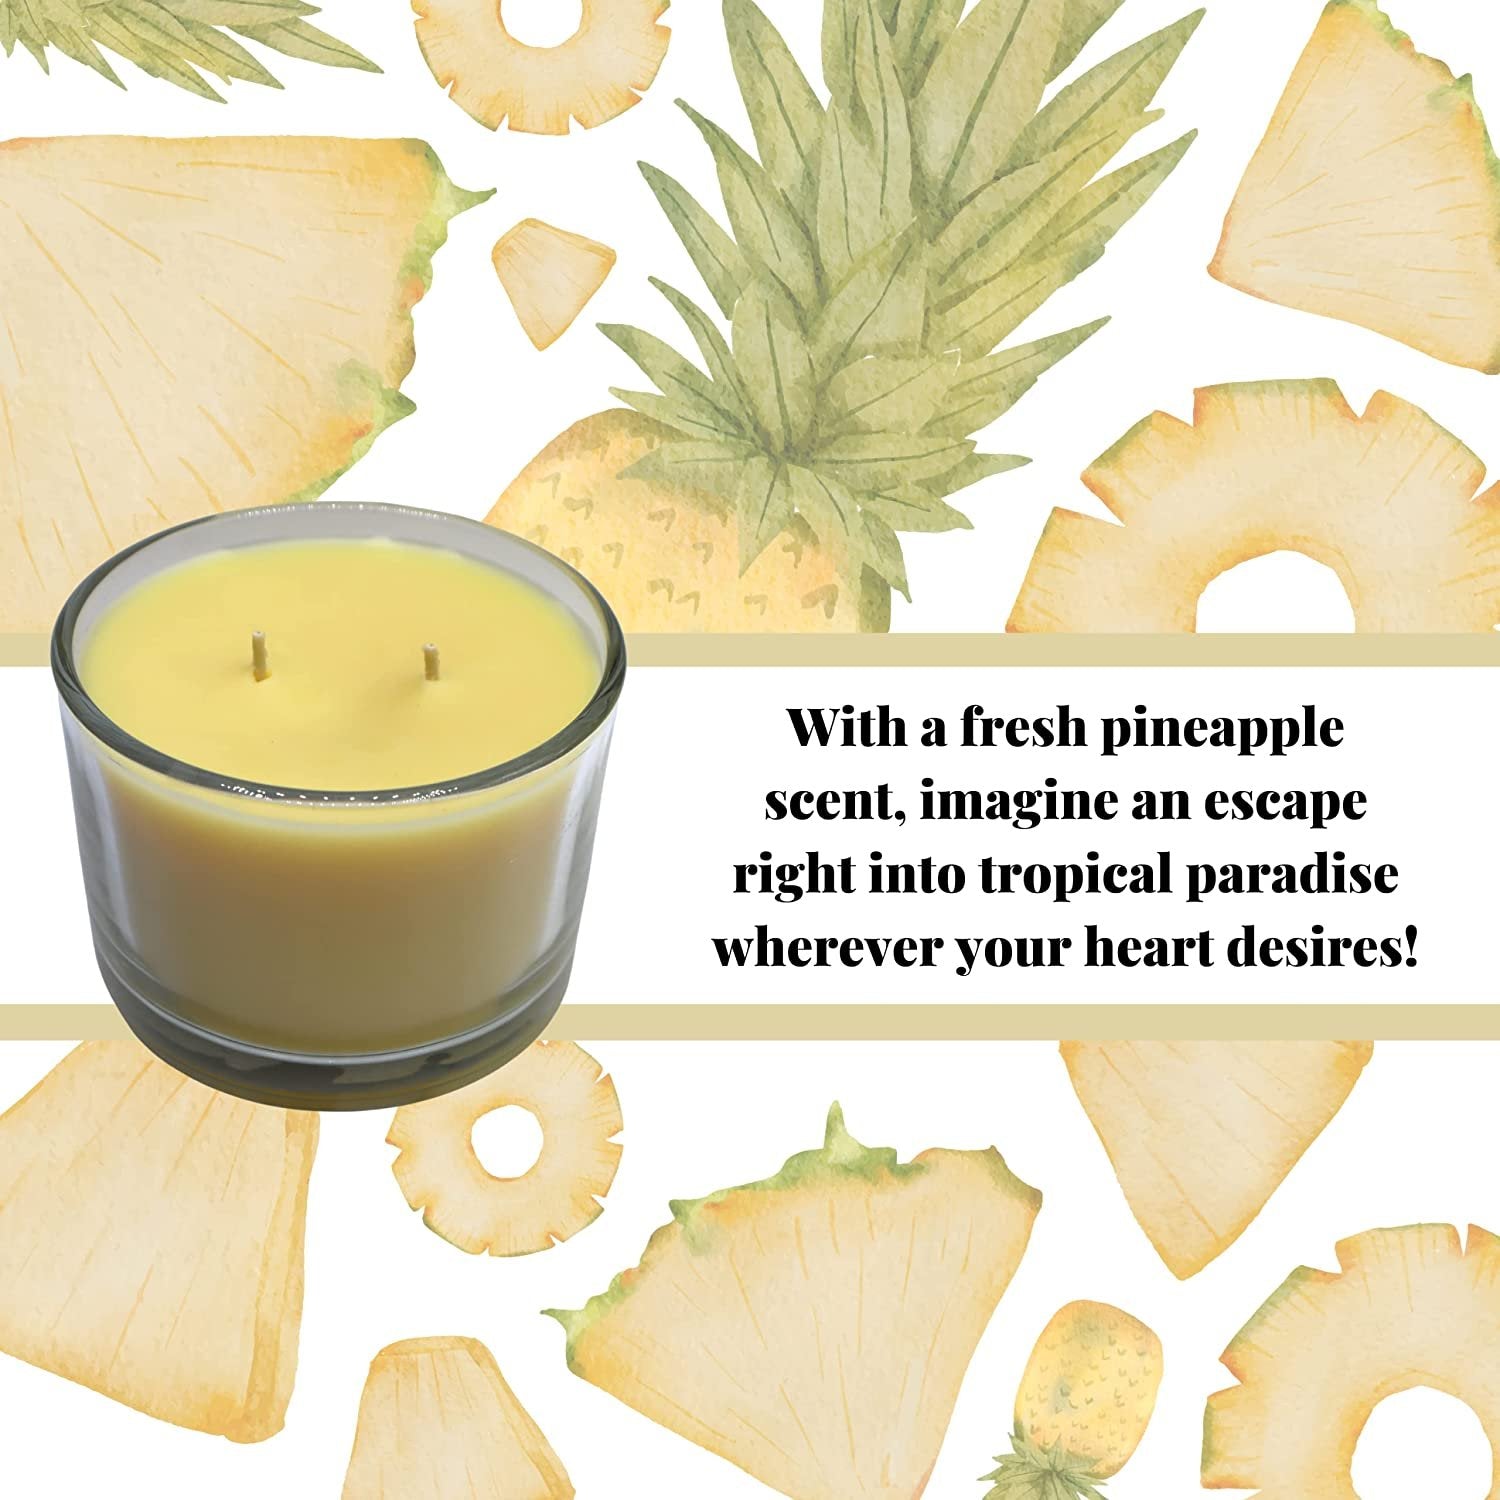 Tyler Candle Company Pineapple Crush Stature Candle - Luxury Home Fragrance Pineapple Crush Scented Candle - Stature Model Home Decor in Clear Glass Candle Holder - 16 Oz, 2 Wick Candle